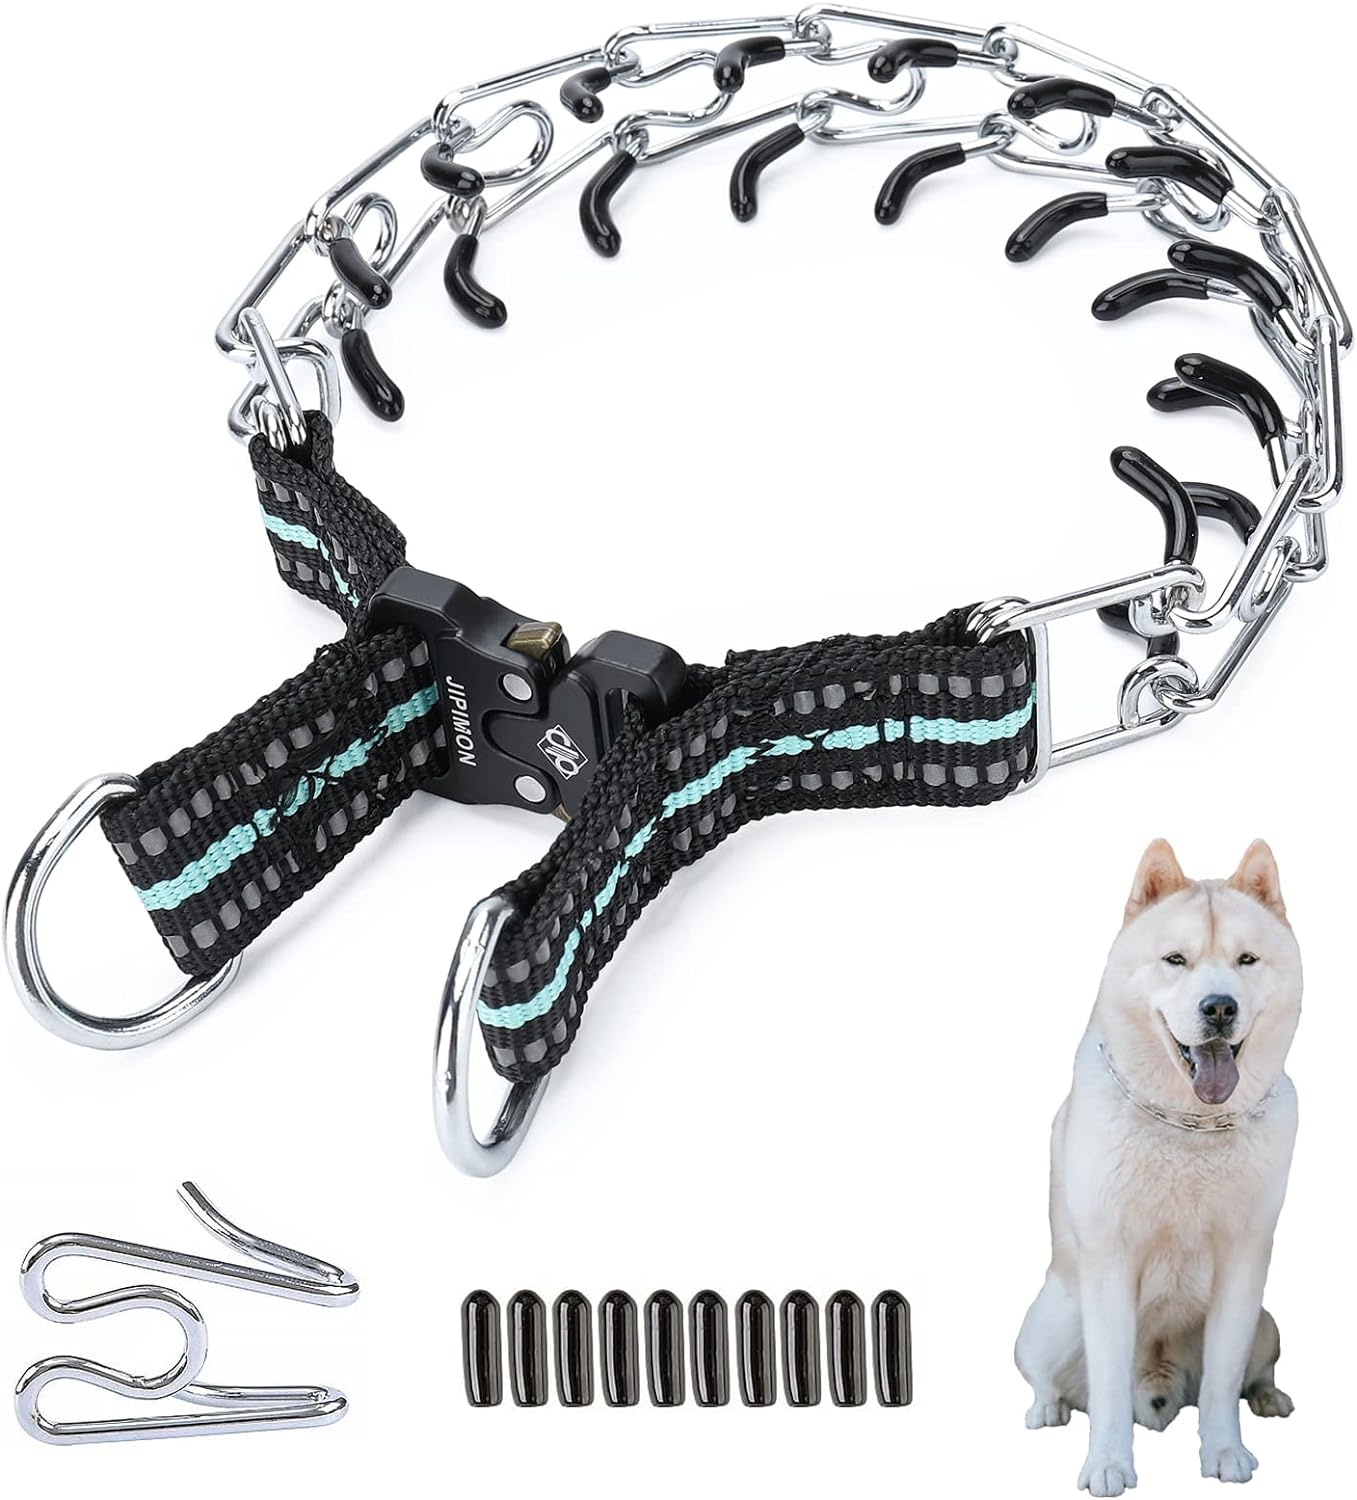 Prong Collar for Dogs Adjustable No Pull Dog Choke Pinch Training Collar with Comfortable Rubber Tip for Small Medium Large Dogs (Medium, Black)